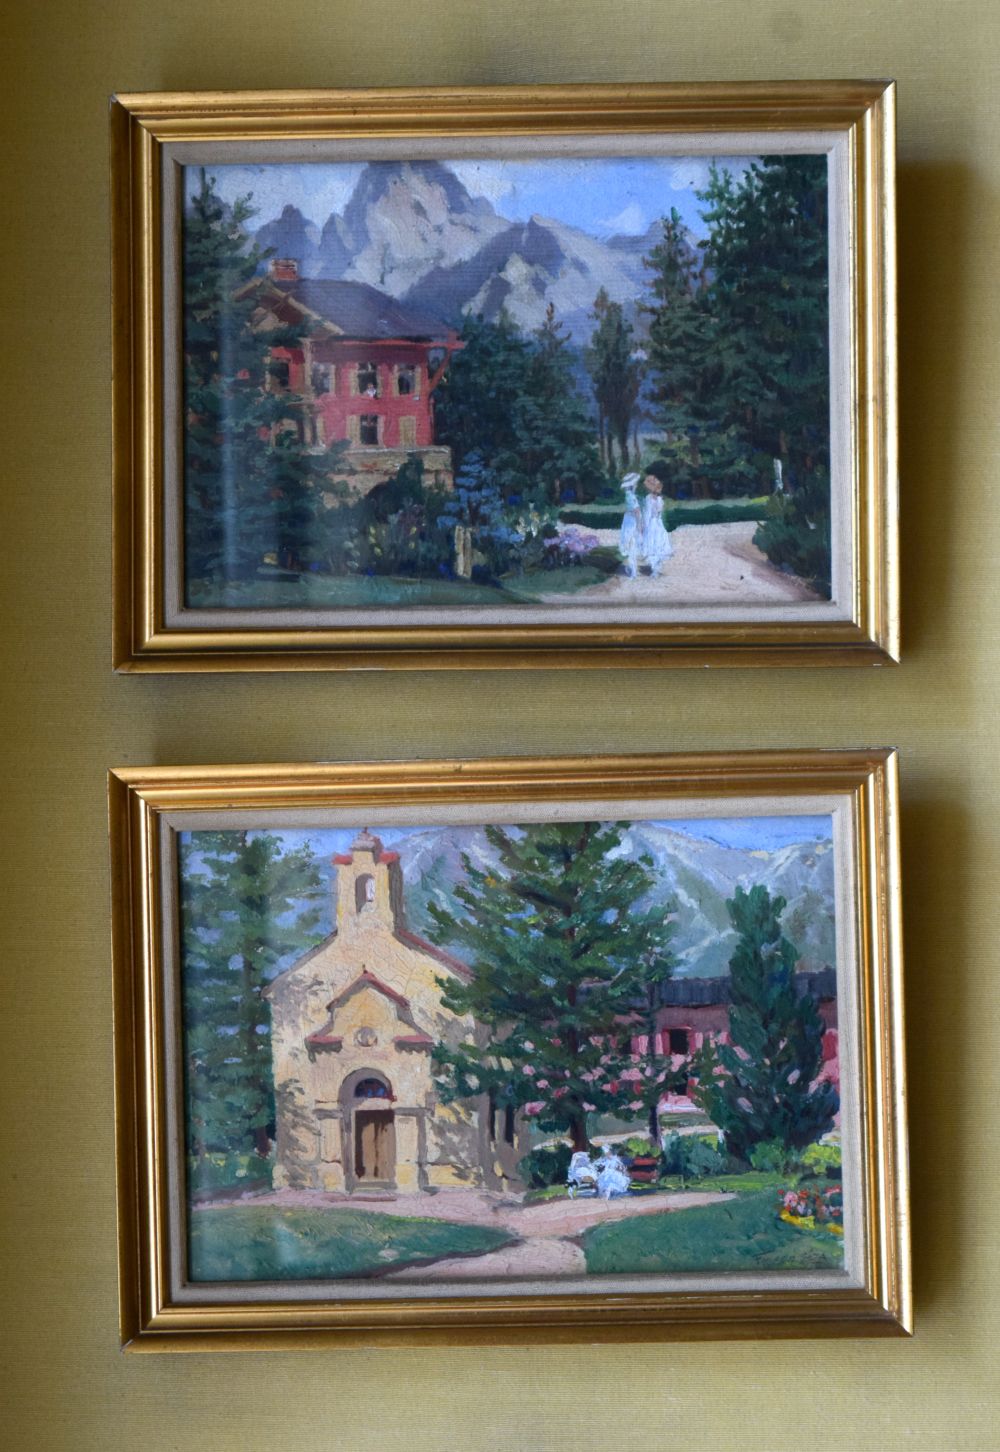 Hungarian School (20th Century) Geza, Pair of oil on canvas, Landscapes. Image 28 cm x 20 cm.